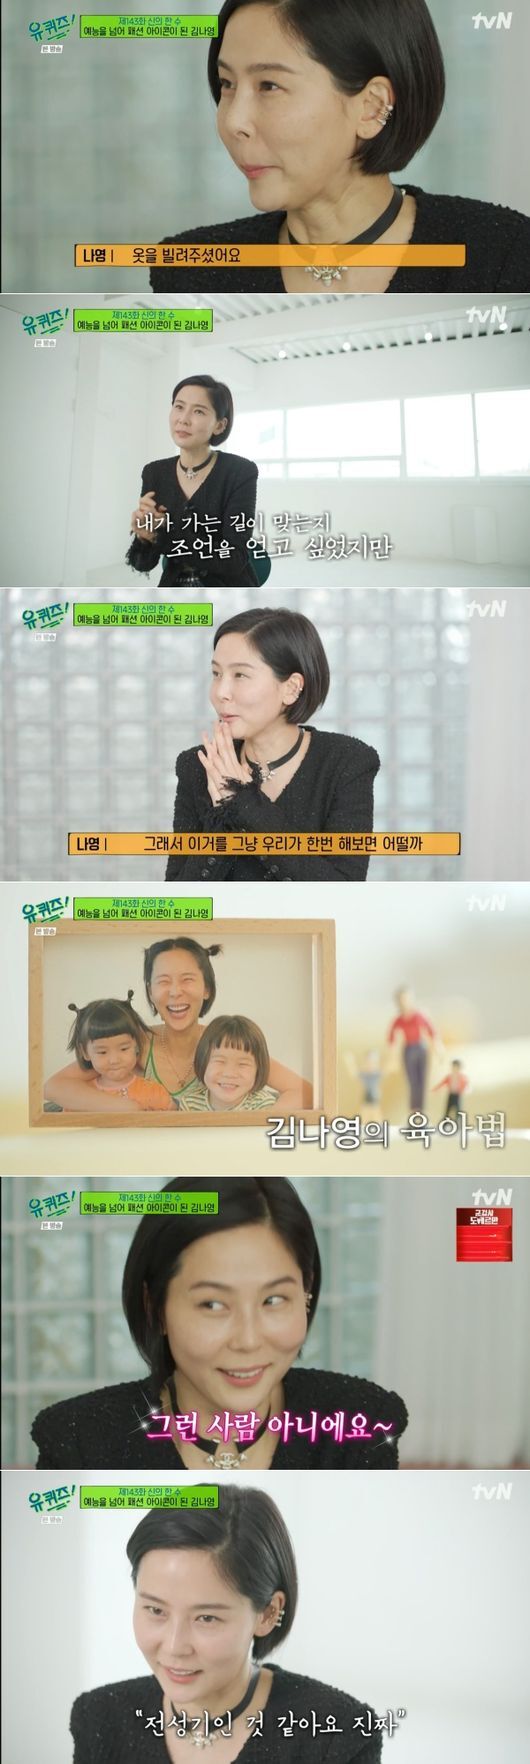 Kim Na-young, a broadcaster in You Quiz on the Block, caught the audience.The 143th episode of TVN entertainment program You Quiz on the Block, which aired on the 23rd, was featured as Hansu of God.On this day, Kim Na-young appeared as a guest.Dreaming of Koreas Aleksa, he ran YouTube channel Kim Na-youngs Nofilter TV and boasted more than 500,000 subscribers.But I was nervous about appearing in You Quiz on the Block.Yoo Jae-Suk and Jo Se-ho were very pleased to meet Kim Na-young, who had been together in MBC entertainment program Nollawa in the past.Three years ago, when You Quiz on the Block was filming on the road, I met Kim Na-youngs son Shin-Urayasu Station in Jeongneung Alley. Kim Na-young said, I saw it.I was surprised then. I wanted to see Anga as something about Shin-Urayasu Station.Among them, Kim Na-young revealed that Black Pink Jenny and actor Kim Go-eun received sponsorship of costumes for You Quiz on the Block from high-end luxury brand C, which is an ambassador.The start of such Kim Na-young was a Mnet street broadcaster.He heard the second Noh Hong-chul and started broadcasting in earnest and enjoyed his first prime with the entertainment with Yoo Jae-Suk such as Come to play and Happy Together.Kim Na-youngs interest in fashion began during Come to Play. He said, I had a dream about fashion before, and I always painted it while broadcasting.I wish Na Young had a lot of interest in fashion, but he didnt want to let go of this (entertainment), said Yoo Jae-Suk.Kim Na-young said, When I was broadcasting, the character became hardened and I disappeared. Sometimes I thought, Who am I?Jo Se-ho said, Sometimes after the recording, my sister looked depressed. She said, I do not know if Im doing well.Kim Na-young was reborn as a fashionista, appearing in Sigi Stylog - Fashion God, which was so troubled.Kim Na-young went to Paris Fashion Week. Kim Na-young said, I walked completely then. Everything. I sold my car and bought my bag.I didnt have any money and I didnt have much to drive, because I didnt have any money and I didnt have much to drive.I cant forget the day I bought it. It was too much for me. I bought it and put it down.At that time, I wanted to be right. Park Myung-soo told me, I can not get away with this.The manager of the agency also advised me to call him to the office and get his head up.I didnt think it would work out that far, but I was not invited at the time, but I was so eager to take pictures, and I thought he was opening the door when I was working hard.Actually Kim Na-young has long been the mainstay of the Paris fashion magazine site.Since then, he has become a fashion program MC, photographed pictures, modeled brands, and has become a significant fashion company. Kim Na-young said, It was the underwear brand that I first modeled.I often wore my fathers running, and when the brand thanked me for the product and flowers, I asked him to model it if he did, and he opened the door.It wasnt a welcome atmosphere for me from the start, and I was looking at it badly, so I wanted to get some advice and check it out, but I didnt have anyone to ask.So I just looked ahead.Kim Na-youngs YouTube channel is also loved; various luxury brands are sending love calls to Kim Na-young.Kim Na-young said, I just like to wear it. I like to go to the clothing store and try it on.I tried on it and thought about how to end it with the editor, but every time I was burdened with fraud, I often said to the clerks when I went to the original clothing store because I would like to wear it. Every year Kim Na-young donates YouTube Revenue. Kim Na-young said, YouTube is good. At first I was too worried.I could buy another one. But when I was worried, I recorded it. Donate. Before I think about it.I think its not my money at all, he said.Kim Na-youngs first seven-year-old Shin-Urayasu Station, the second five-year-old Lee Joon, is also a hot topic. Kim Na-young said, I lived a little more than a child and I can feel a little more.He also said, I also study a lot while watching Dr. Oh Eun-youngs book, but every day when a child falls asleep, I reflect on what I can not do.Jo Se-ho said, I feel that time is fast. I did not talk about this at that time.Kim Na-young said, I used to call you when you were at Shin-Urayasu Station on You Quiz on the Block.I cried at the time. You said, call me if you need anything at any time. Yoo Jae-Suk said, I have my own petty feelings.We worked really hard on Come to Play and ended suddenly, so when we got the grand prize at the year-end awards ceremony, Na Young cried a lot. Kim Na-young said, In a way, I was the one who was next to me when I sent a dark and cloudy Sigi.Jo Se-ho added, The person who thought that she was an adult was younger than her sister now.Finally, Kim Na-young said, I want to grow old nowadays, and the people who are next to me are inspired by me and they have a good influence on others.I think that would be good. Kim Na-young wrote a video letter to himself, who had been on a plane to Paris Fashion Week in the past, at the urging of Jo Se-ho.Dont worry, itll all be fine. Enjoy yourself. Therell be good things. Fighting, he laughed.I think there are warm days in my life these days. I think its my prime. I can grow up beautifully. Im happy.I promise to enjoy these days a little better. He said, Shin-Urayasu Station, Lee Joona is so happy.I think she was so brave with you two, and she was becoming a good person. Ill be a good mother. Thank you.Thats the translators regular program: sitting at a desk and working steadily, he said.The first subtitle of his life is likely to be based on true story.TVN screen.